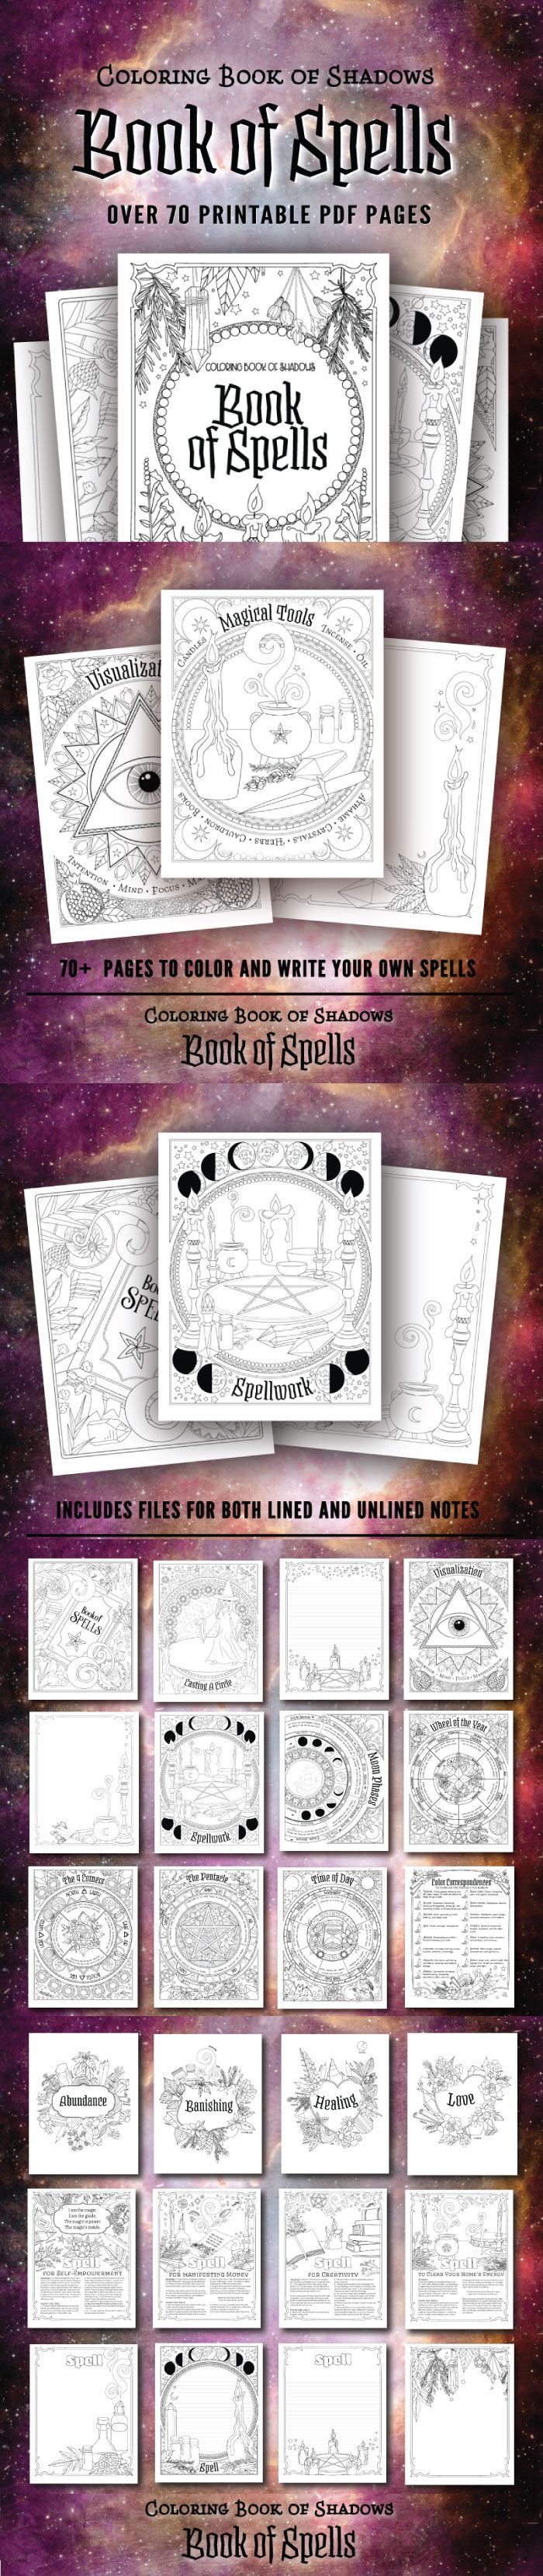 The Magic Path Of Intuition Pdf Free